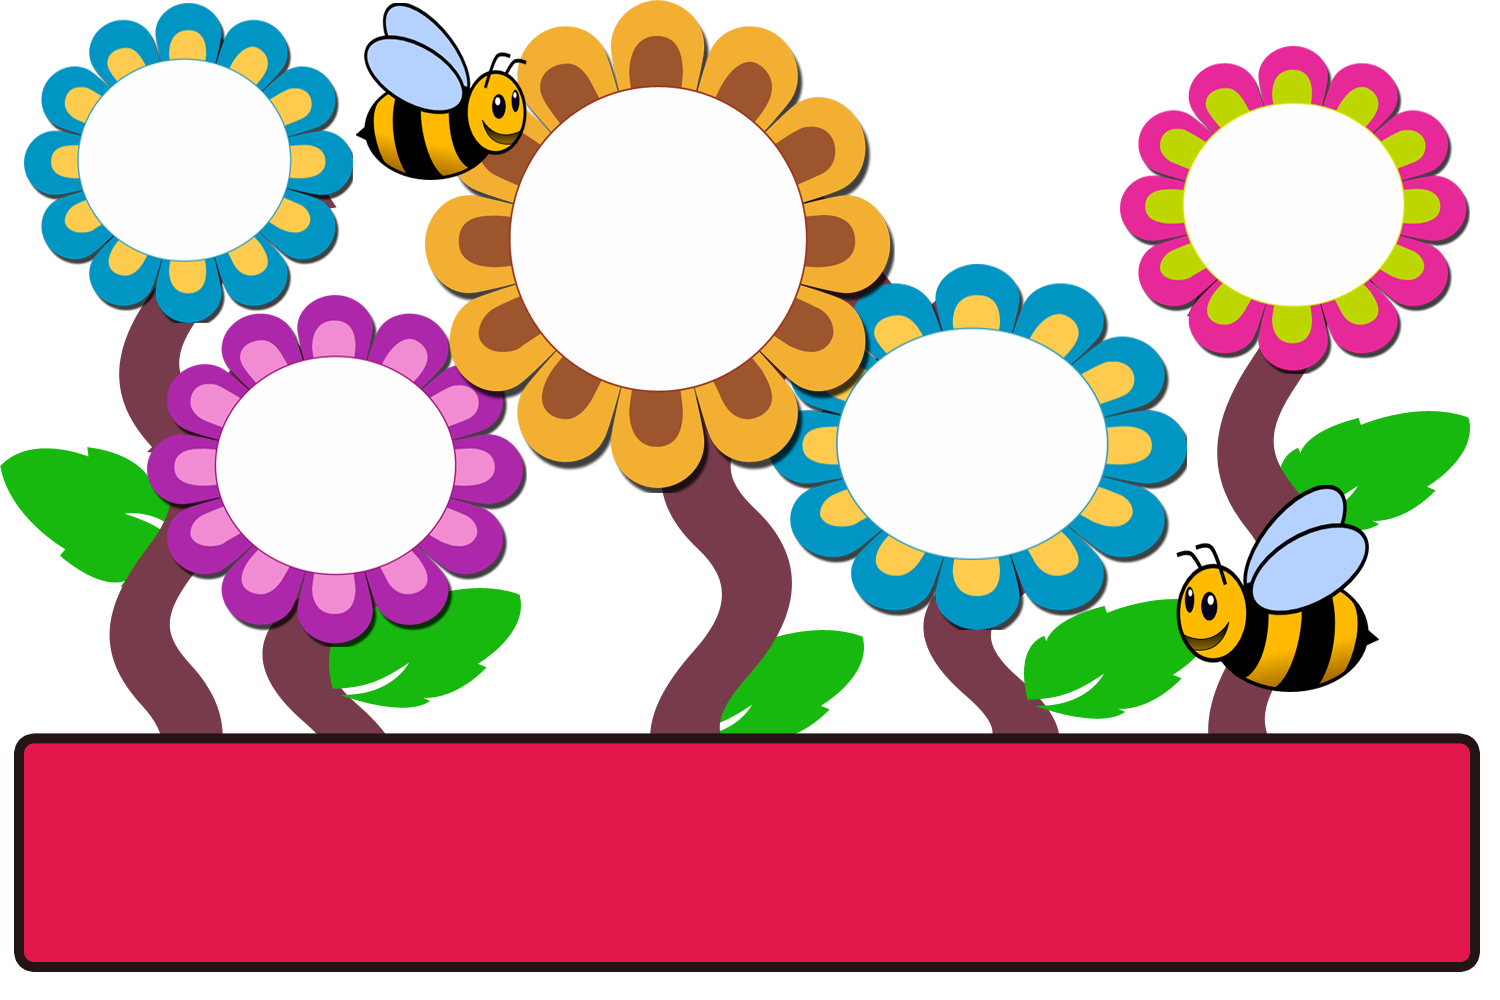 Bunga Transparent PNG Pictures - Free Icons and PNG ...